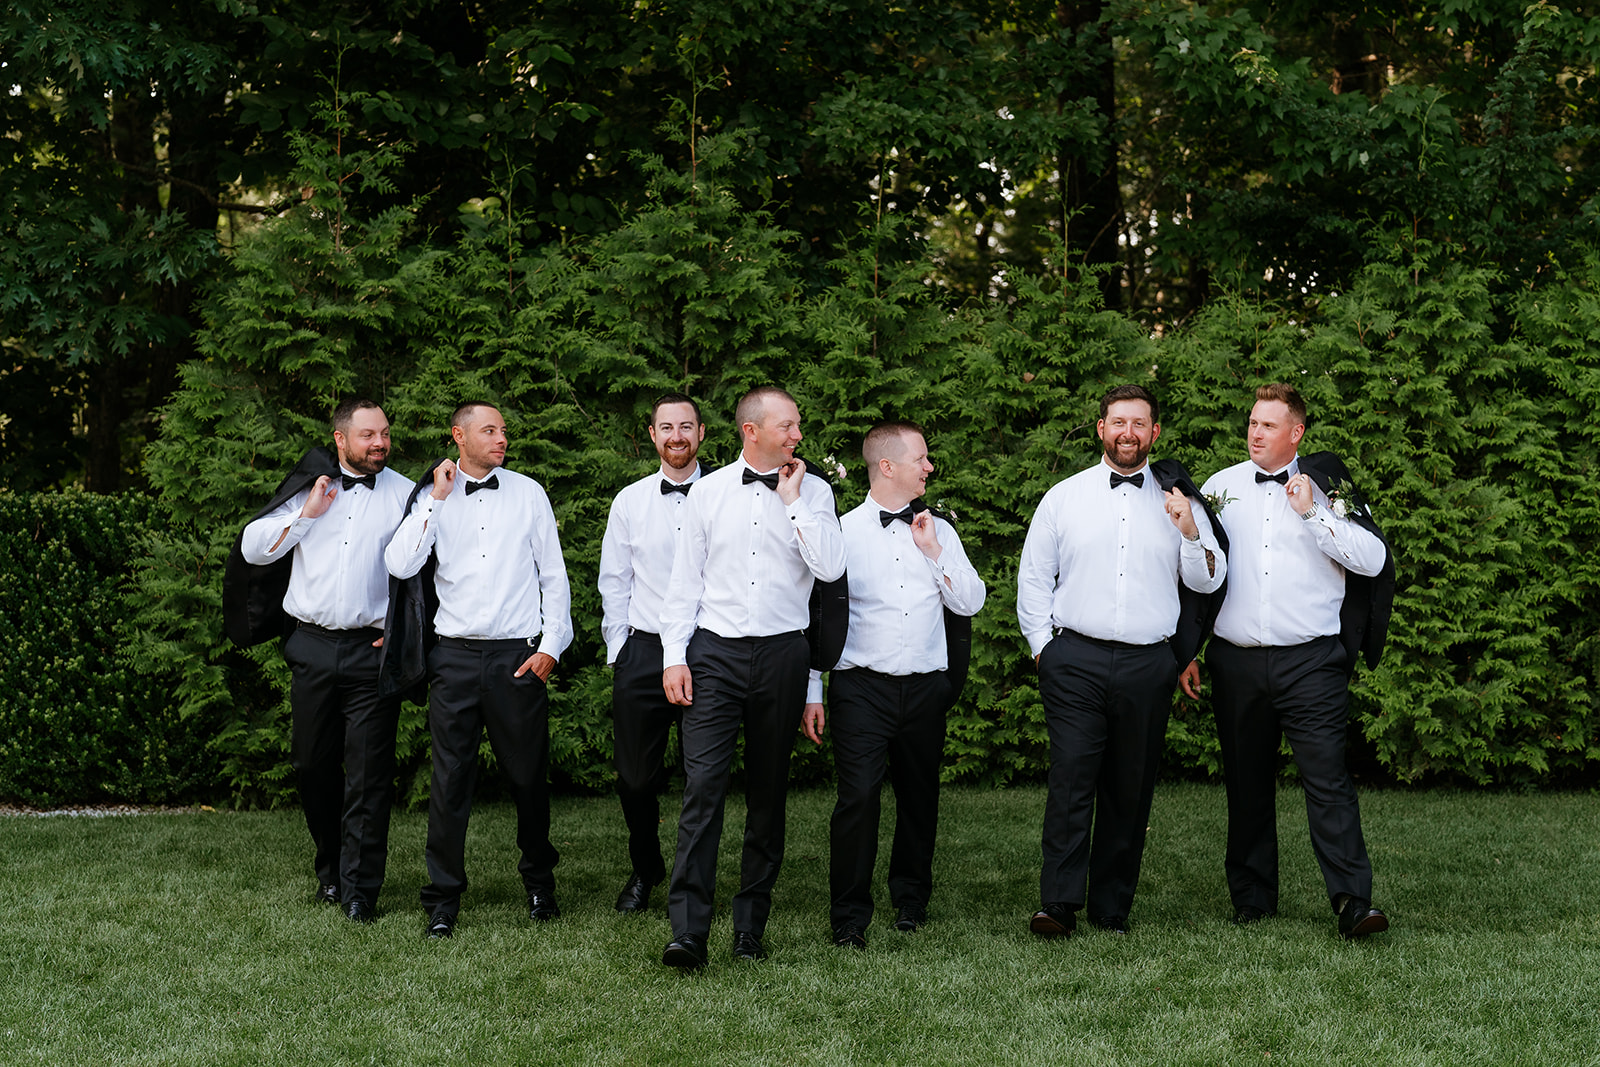 A group of men dressed in black tuxedos with boutonnieres stand in a line on a grassy area with a backdrop of dense green shrubbery at Lakeview Pavilion.